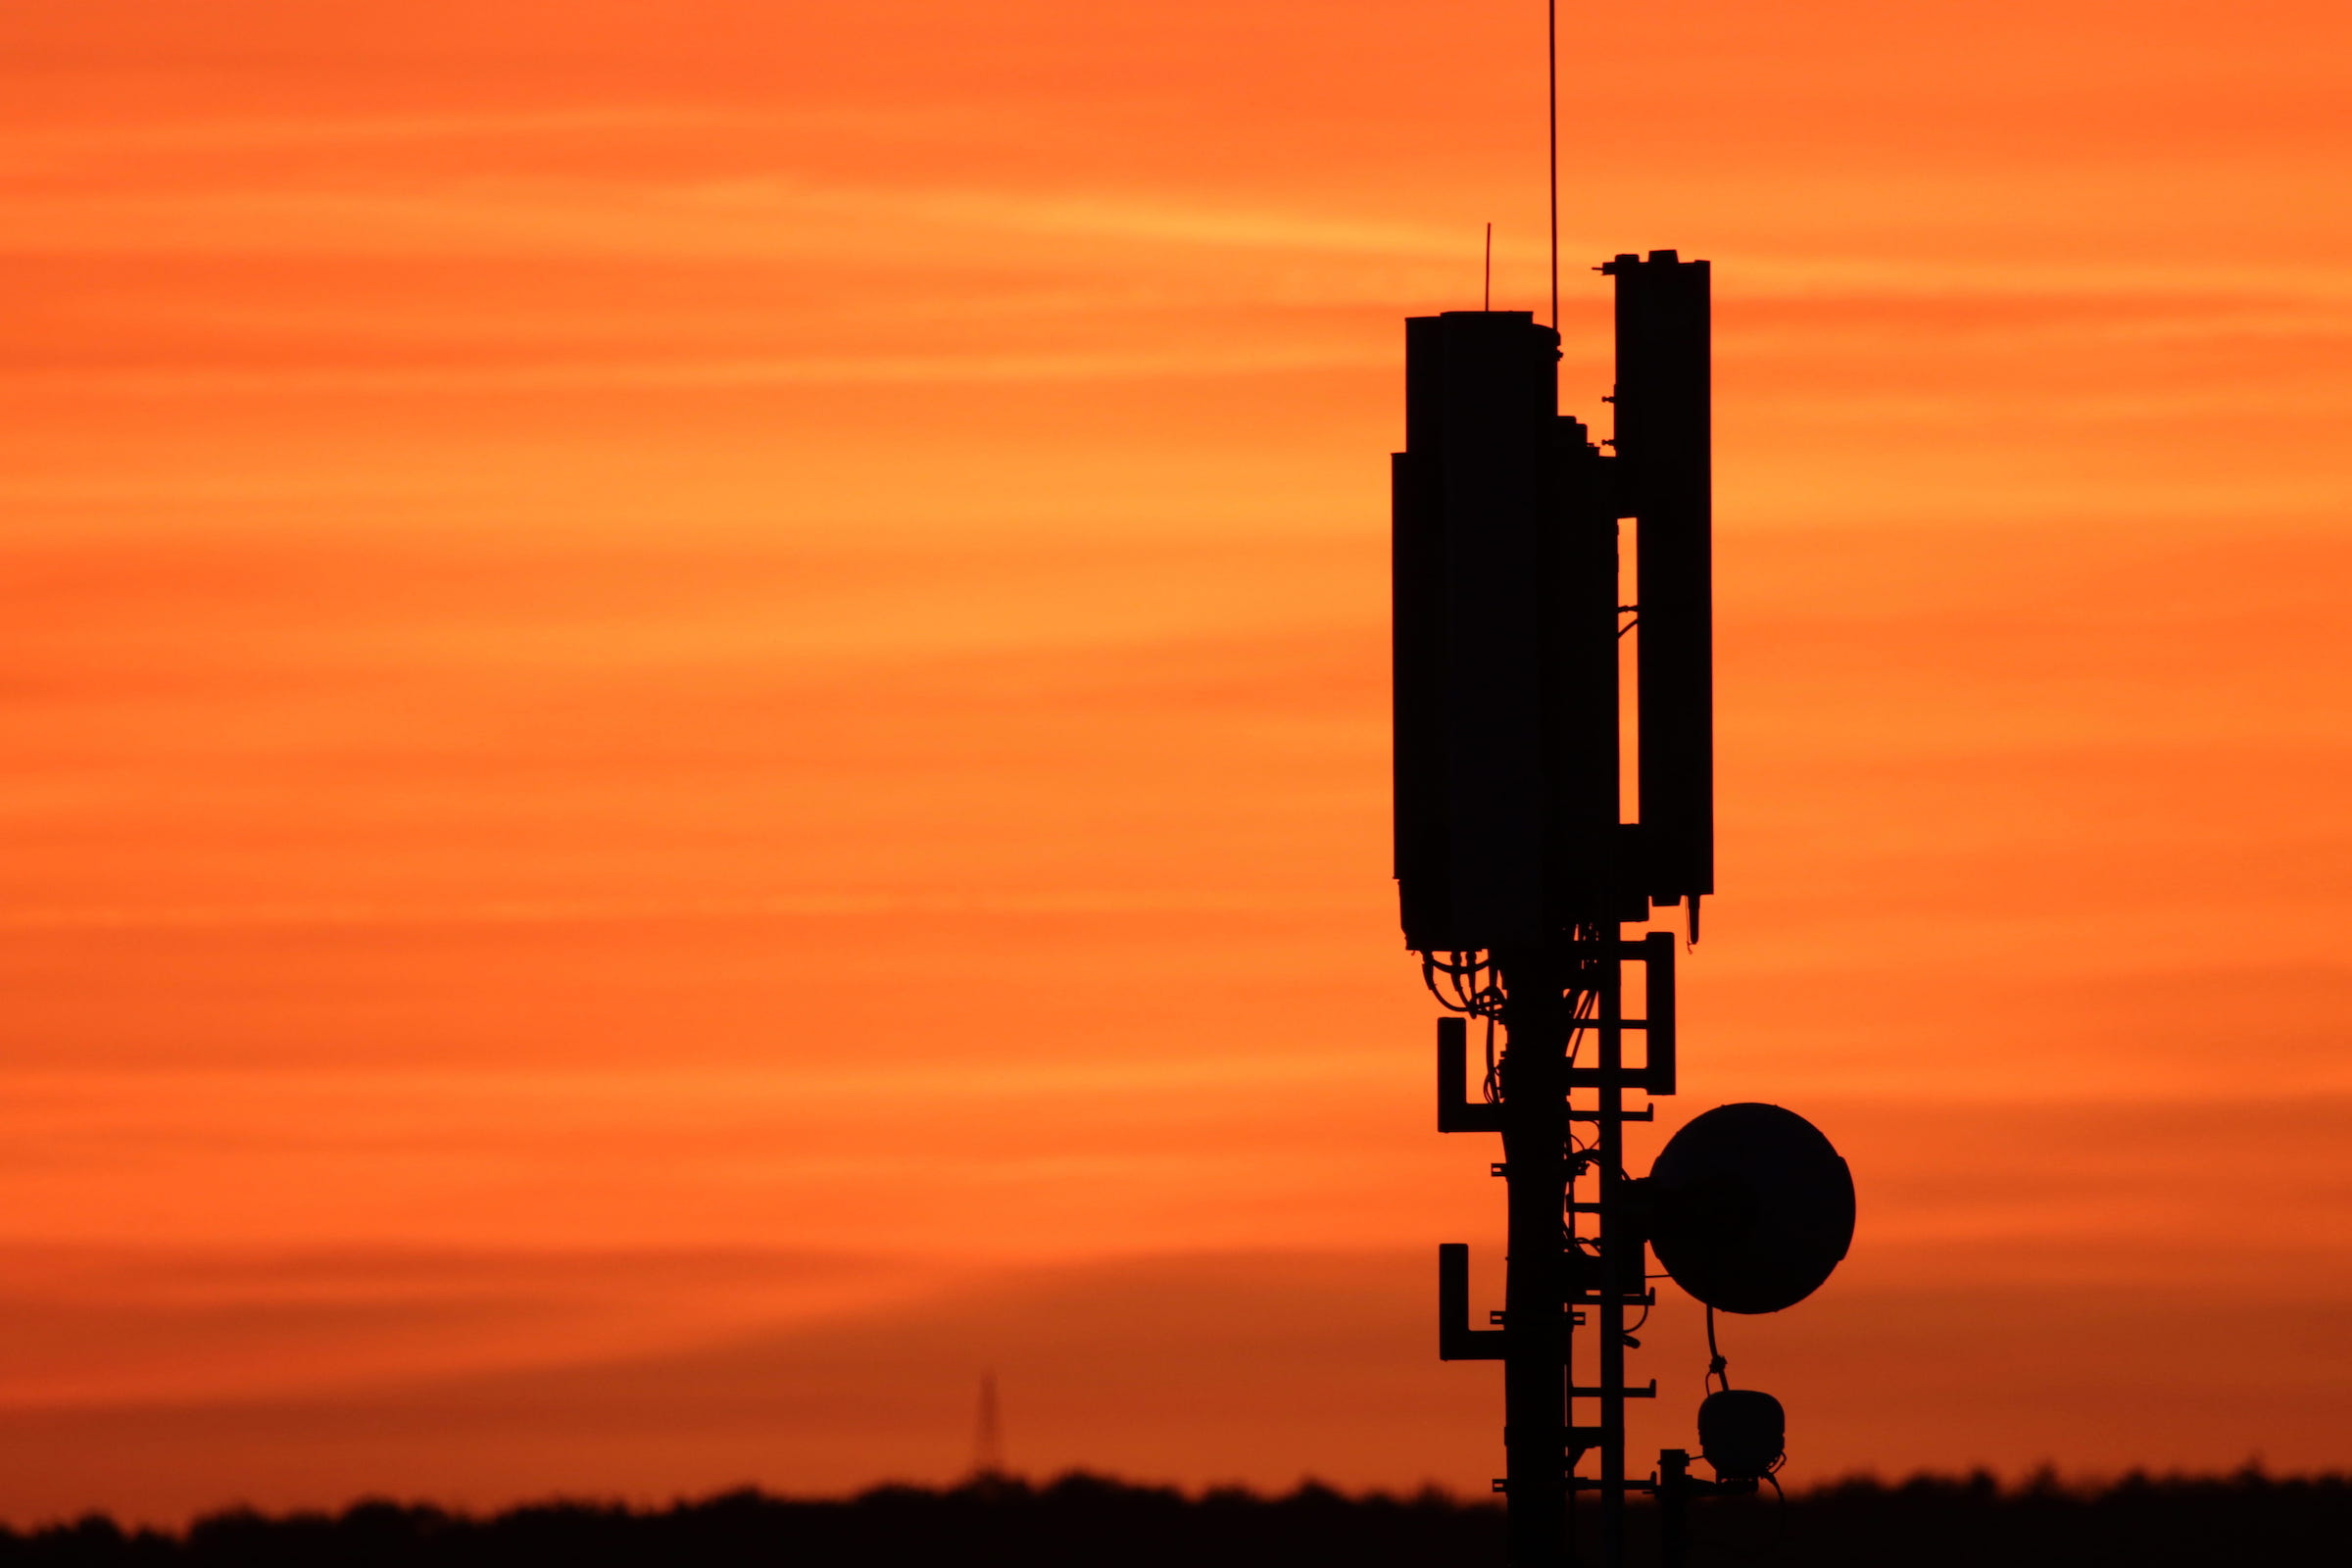 5G infrastructure relies heavily on 4G LTE infrastructure and includes advanced antenna systems and other high-reliability connectivity products.